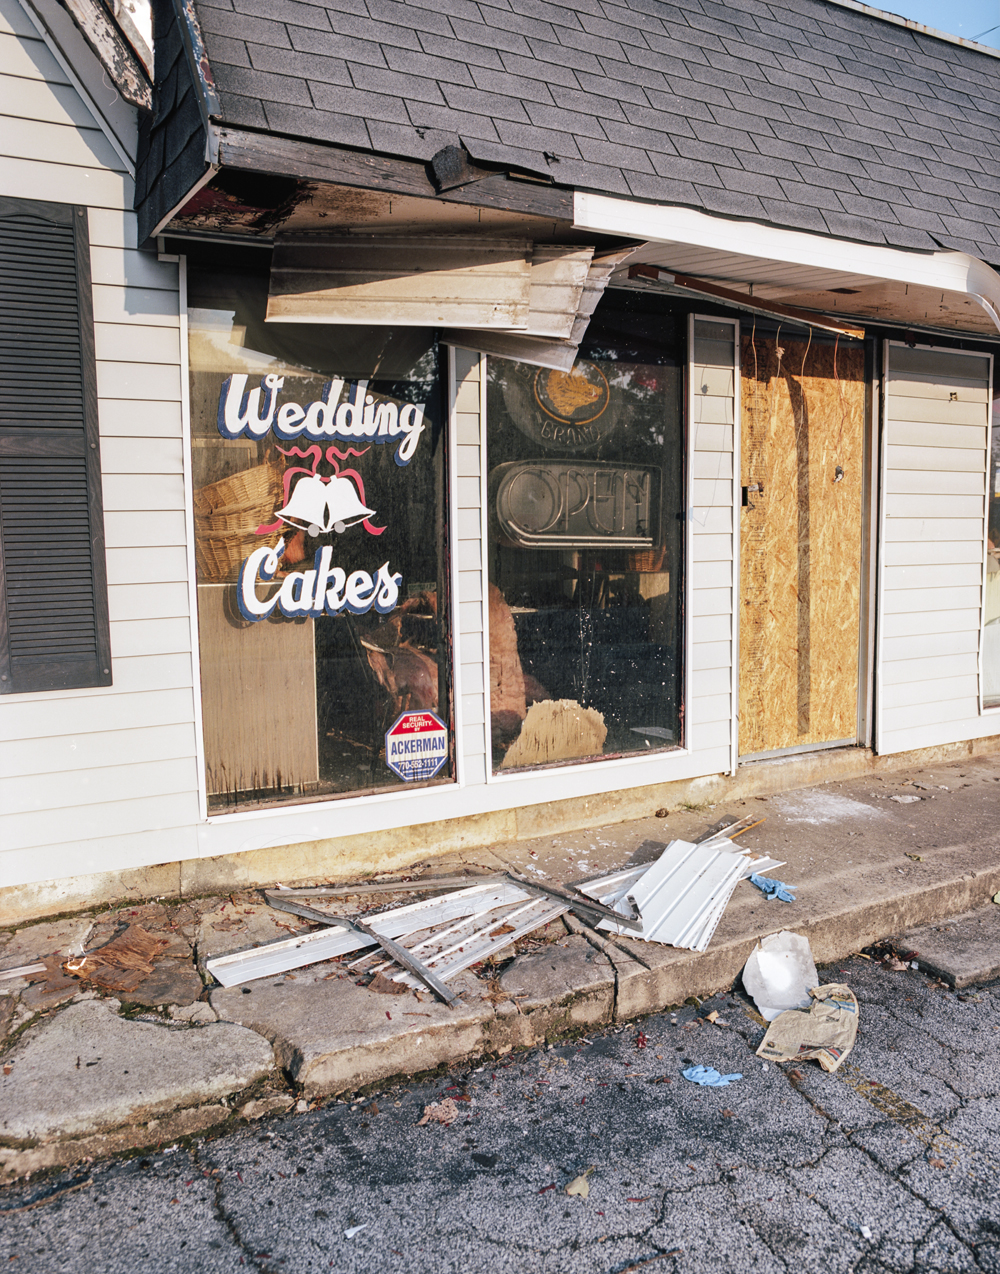 An abandoned wedding cake shop, with debris in front